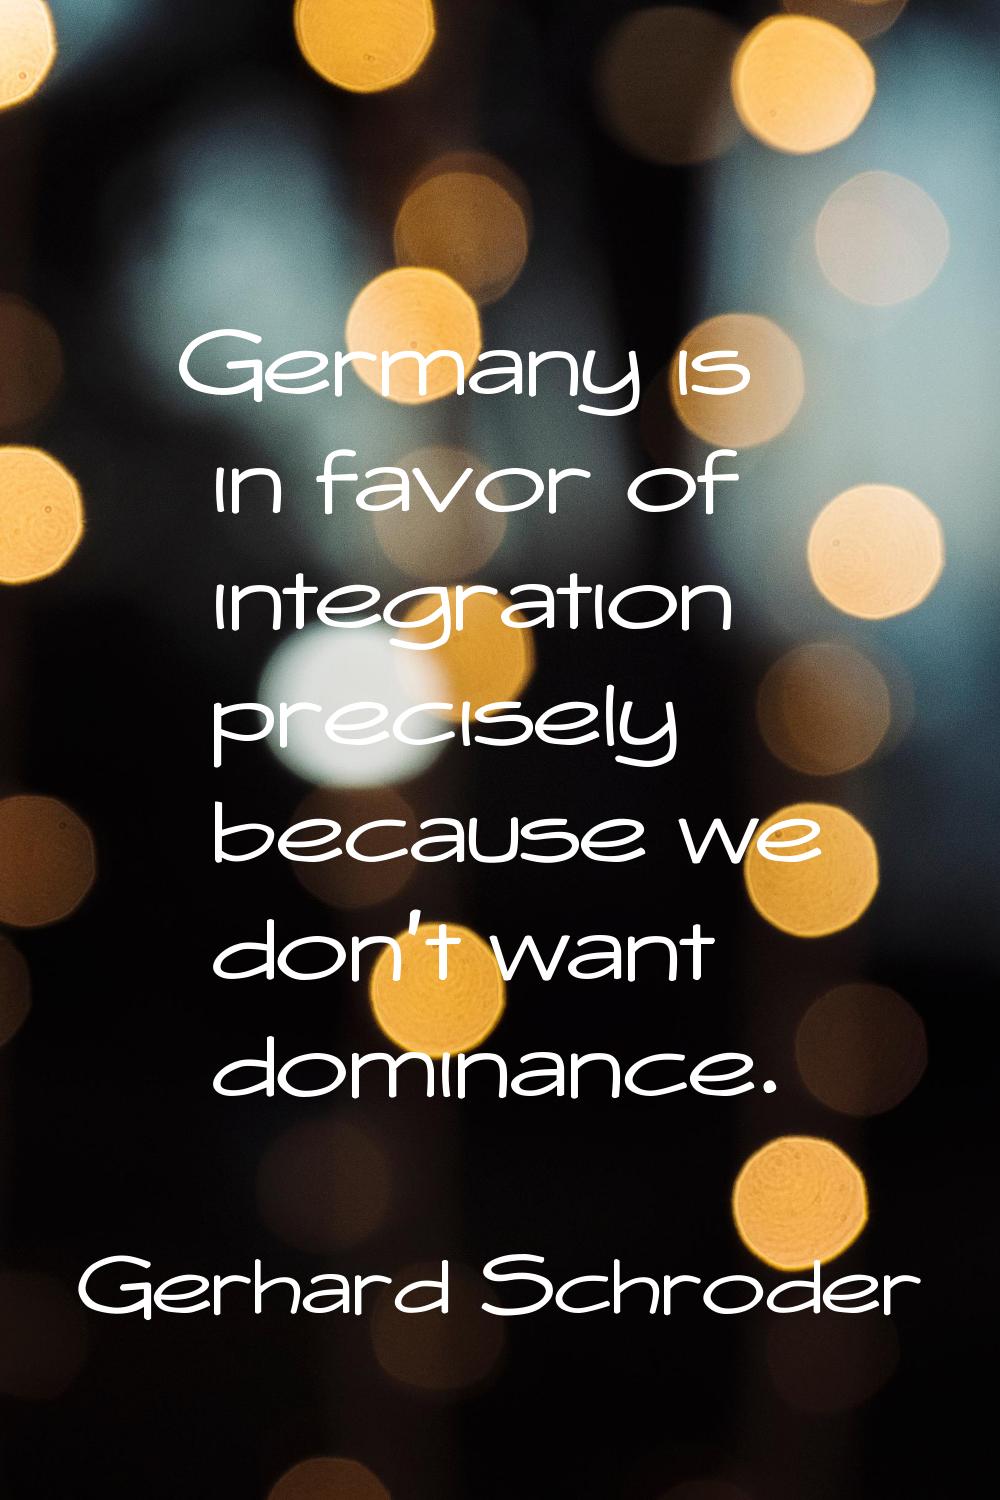 Germany is in favor of integration precisely because we don't want dominance.